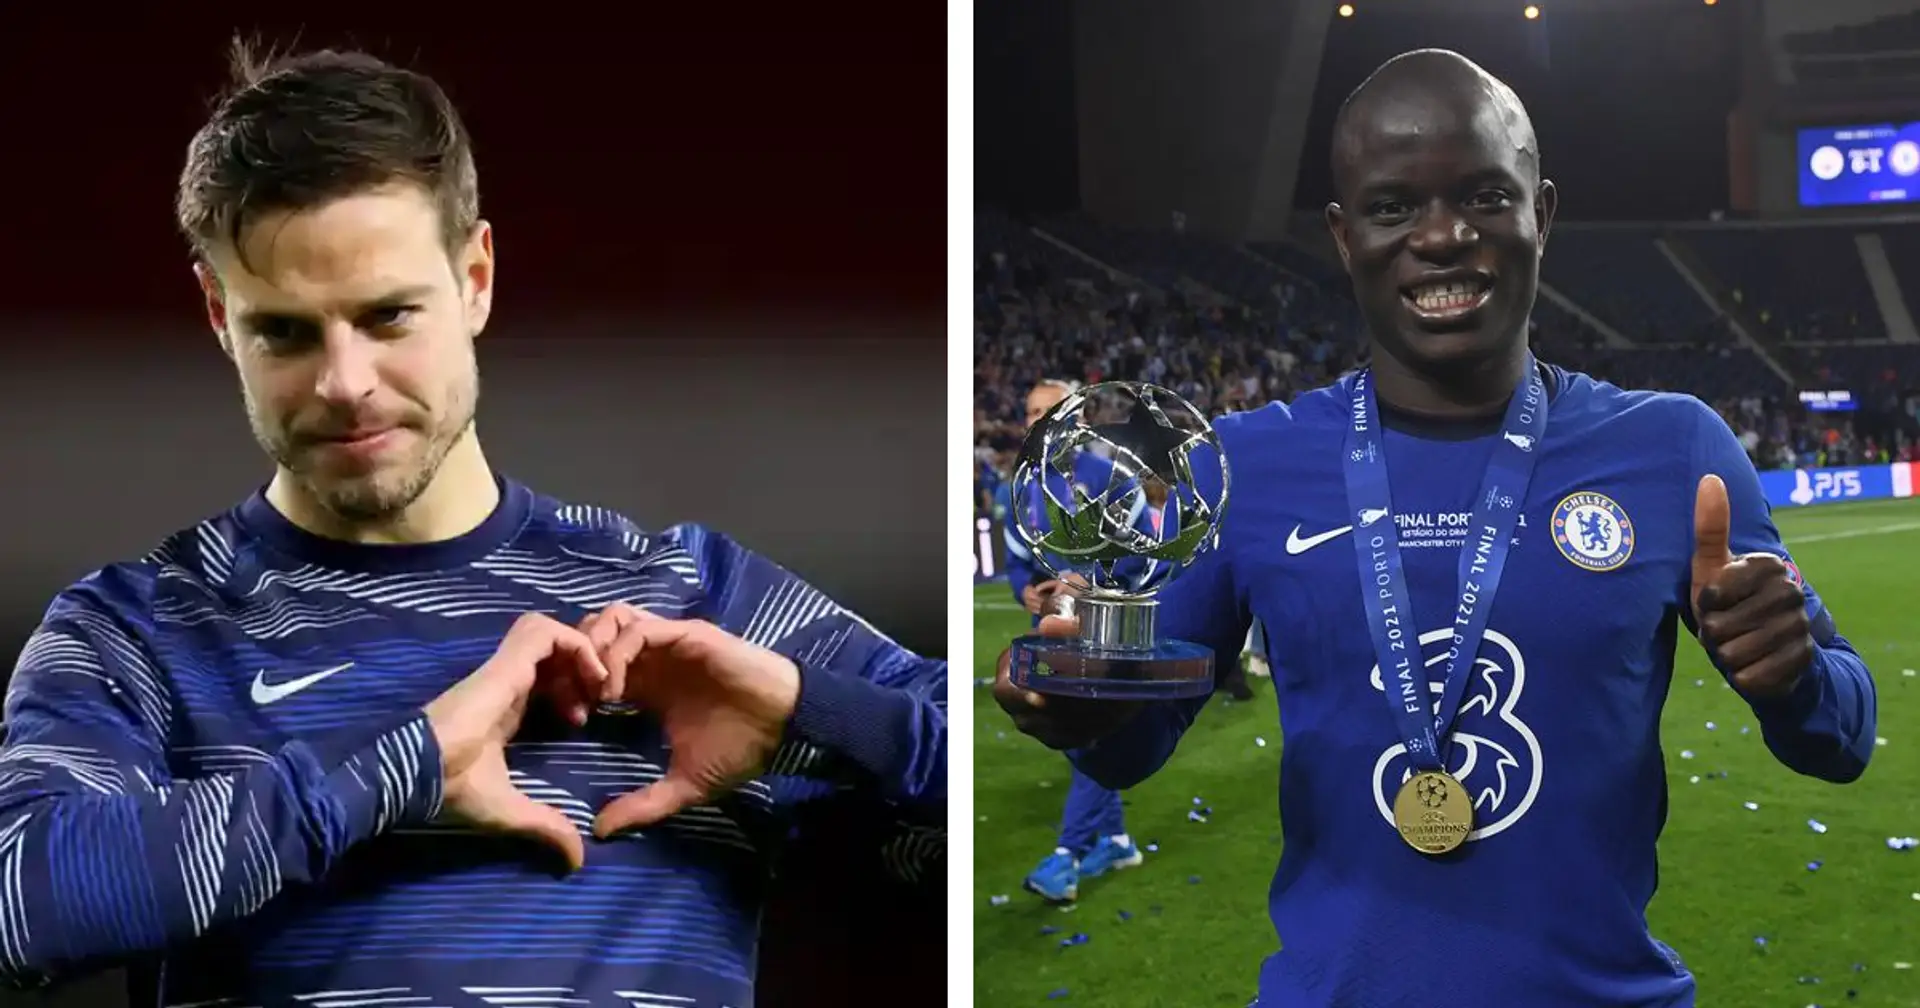 'He never runs out of battery': Azpilicueta showers praise on 'special' Kante